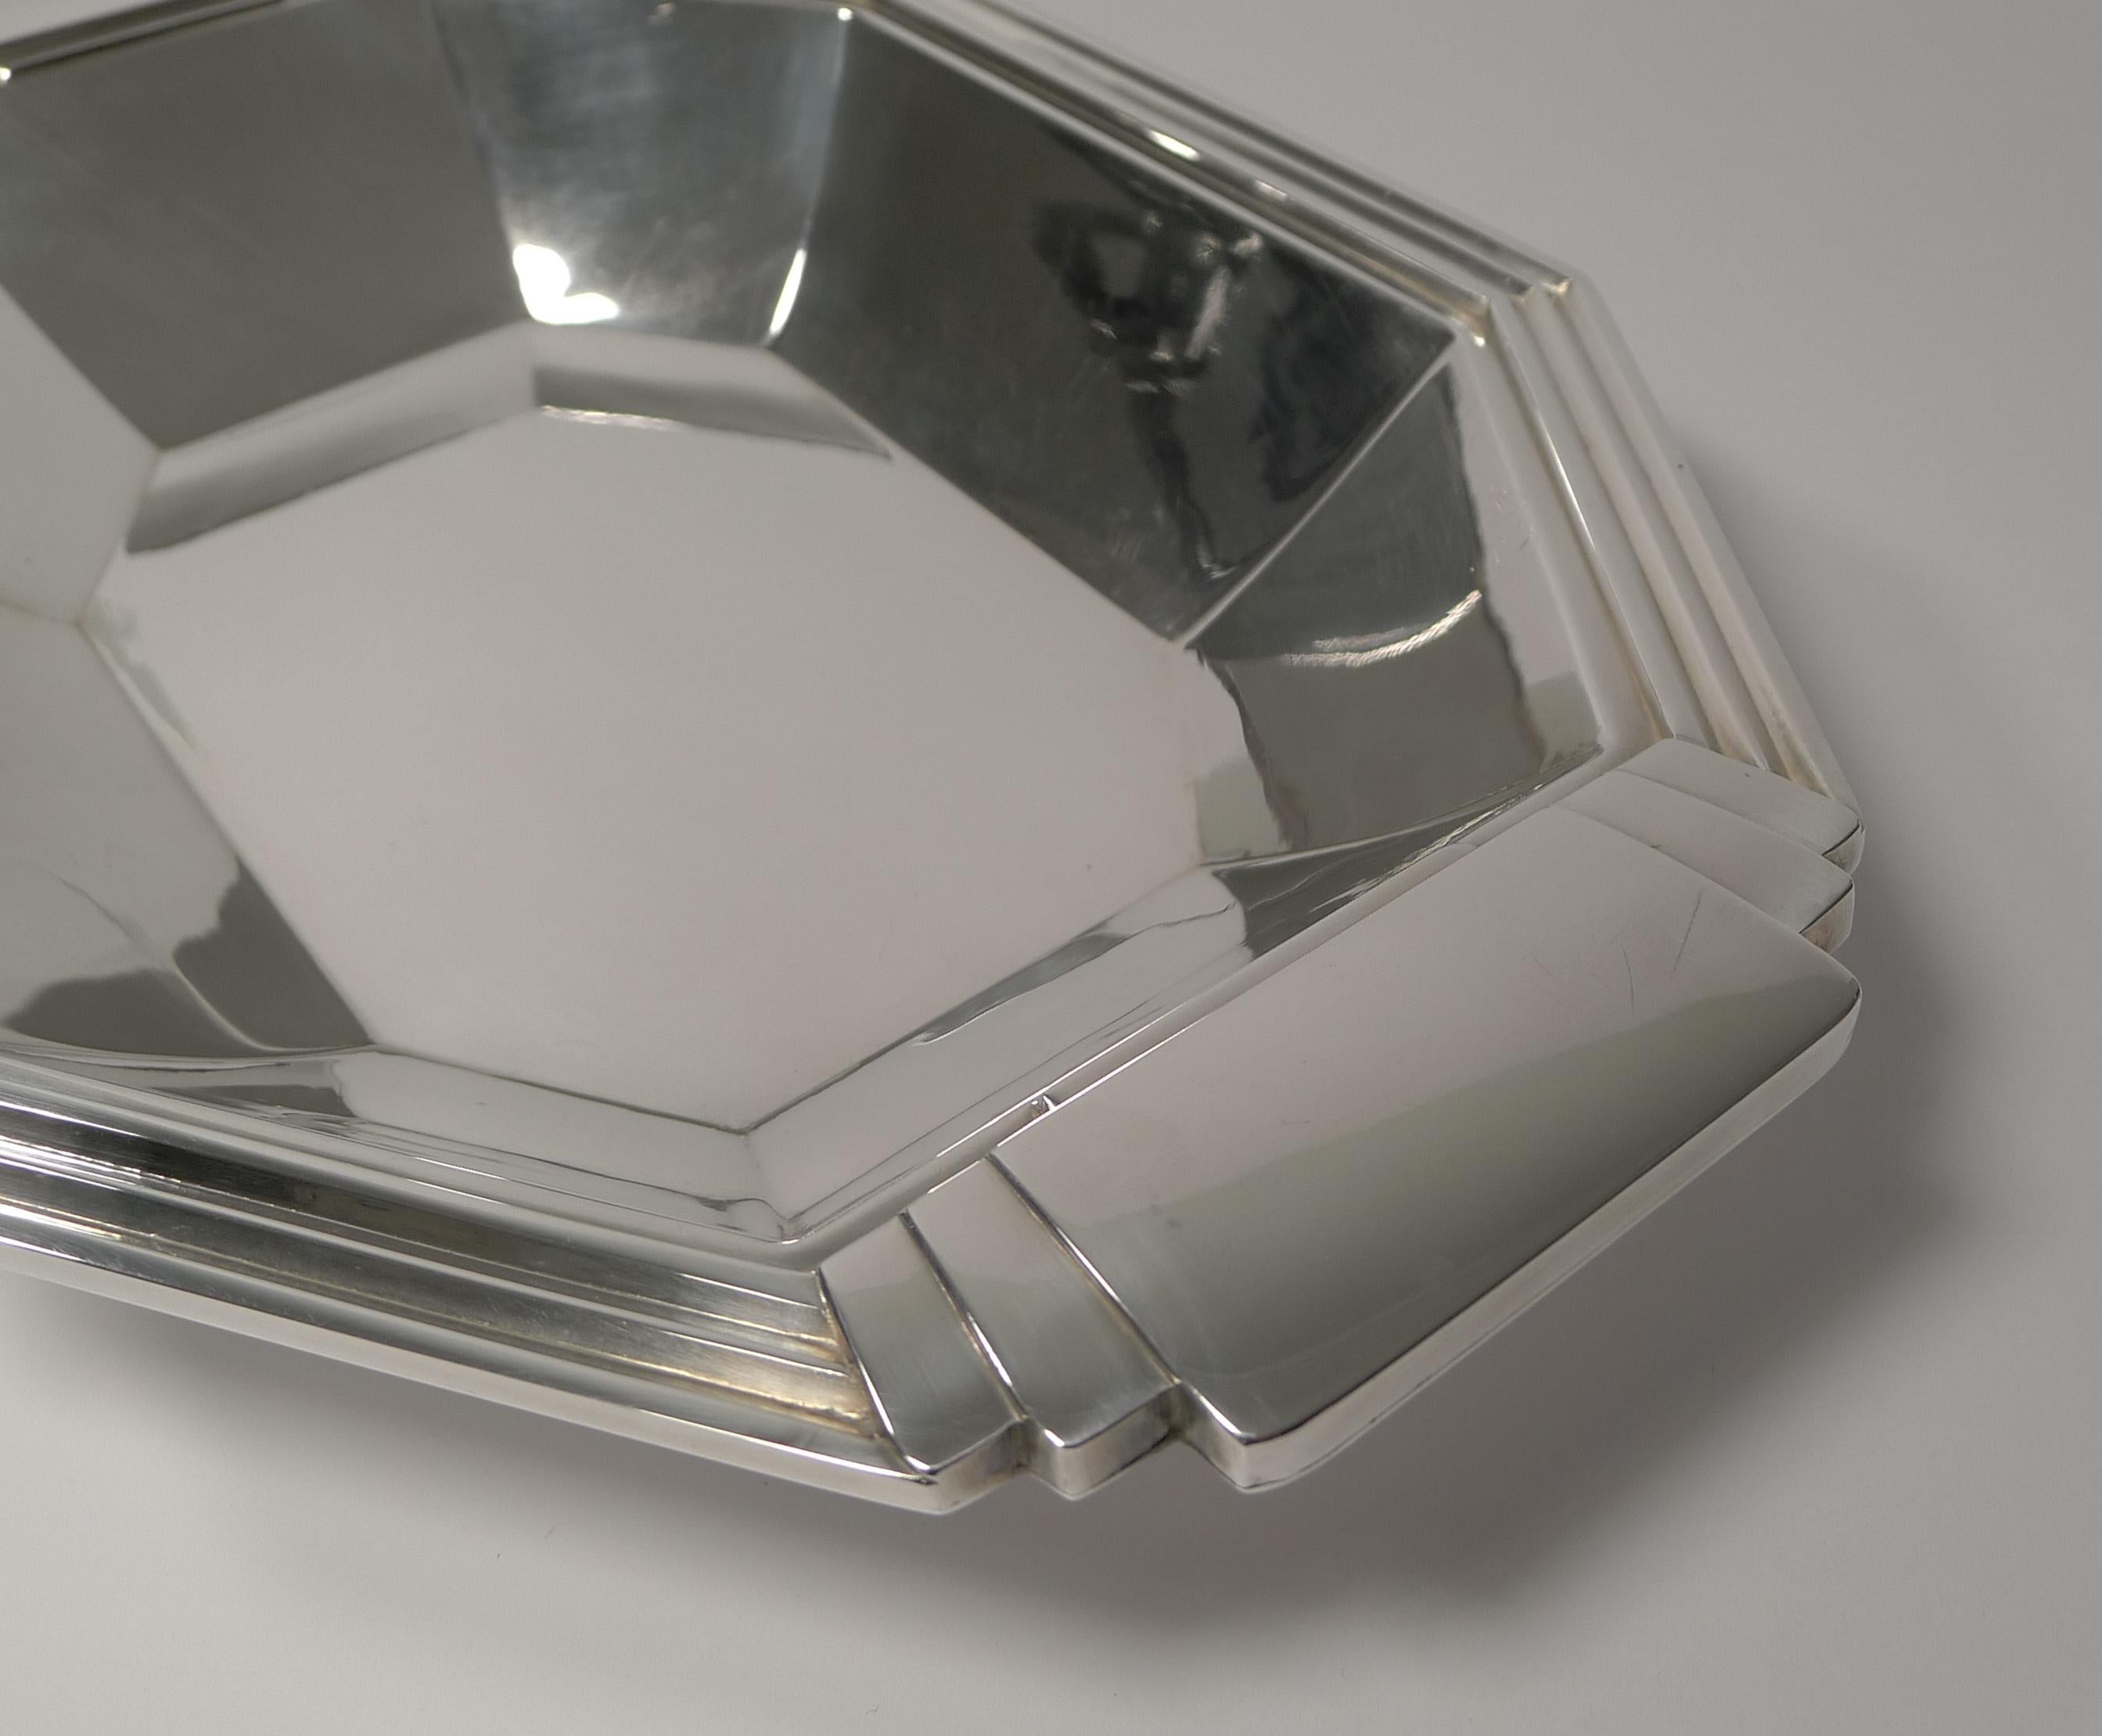 Mid-20th Century French Silver Plated Art Deco Bread Basket / Bowl by Apollo Orfevrerie